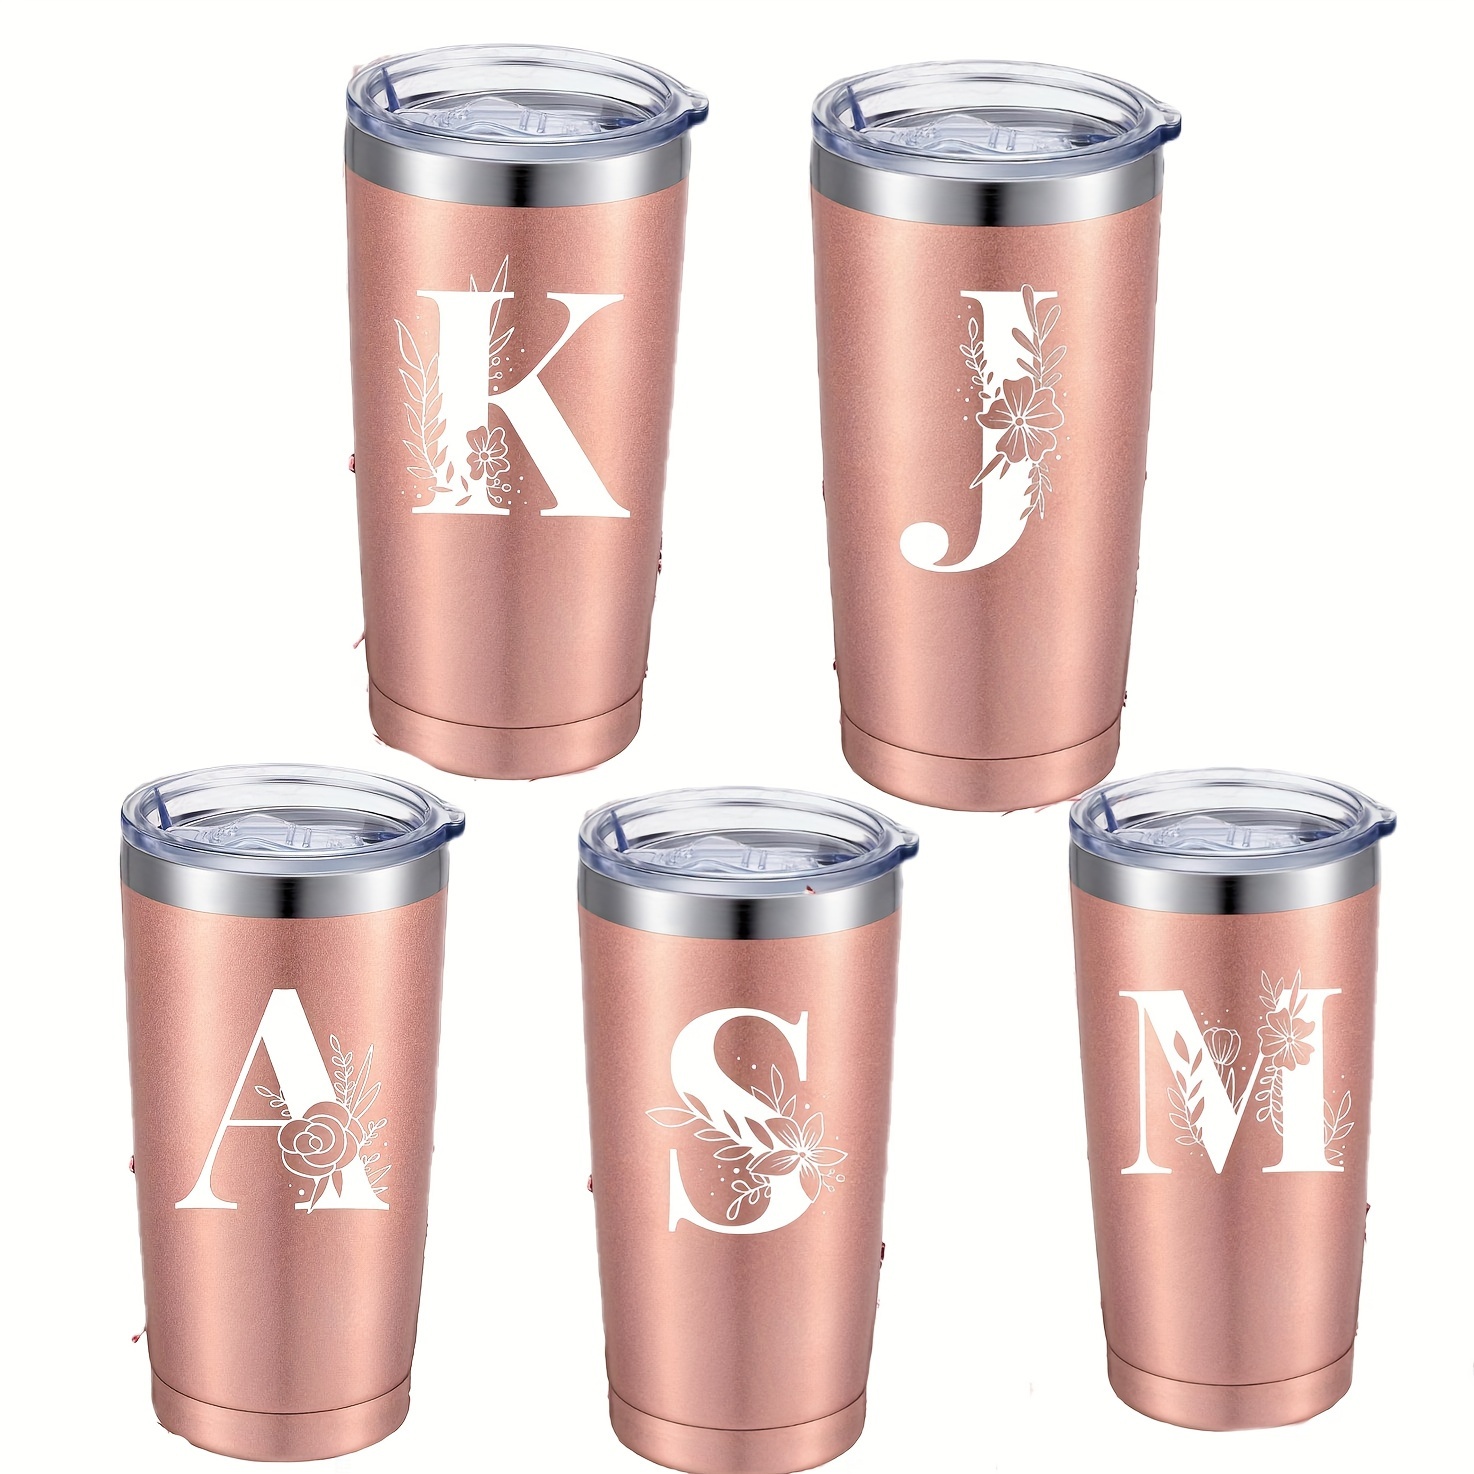 Best Mom Ever Gift - 20 oz Skinny Stainless Steel Insulated Tumbler  Engraved Travel Coffee Mug Gift for Mom, om Birthday, Christmas, Mother's  Day Gift with Straw